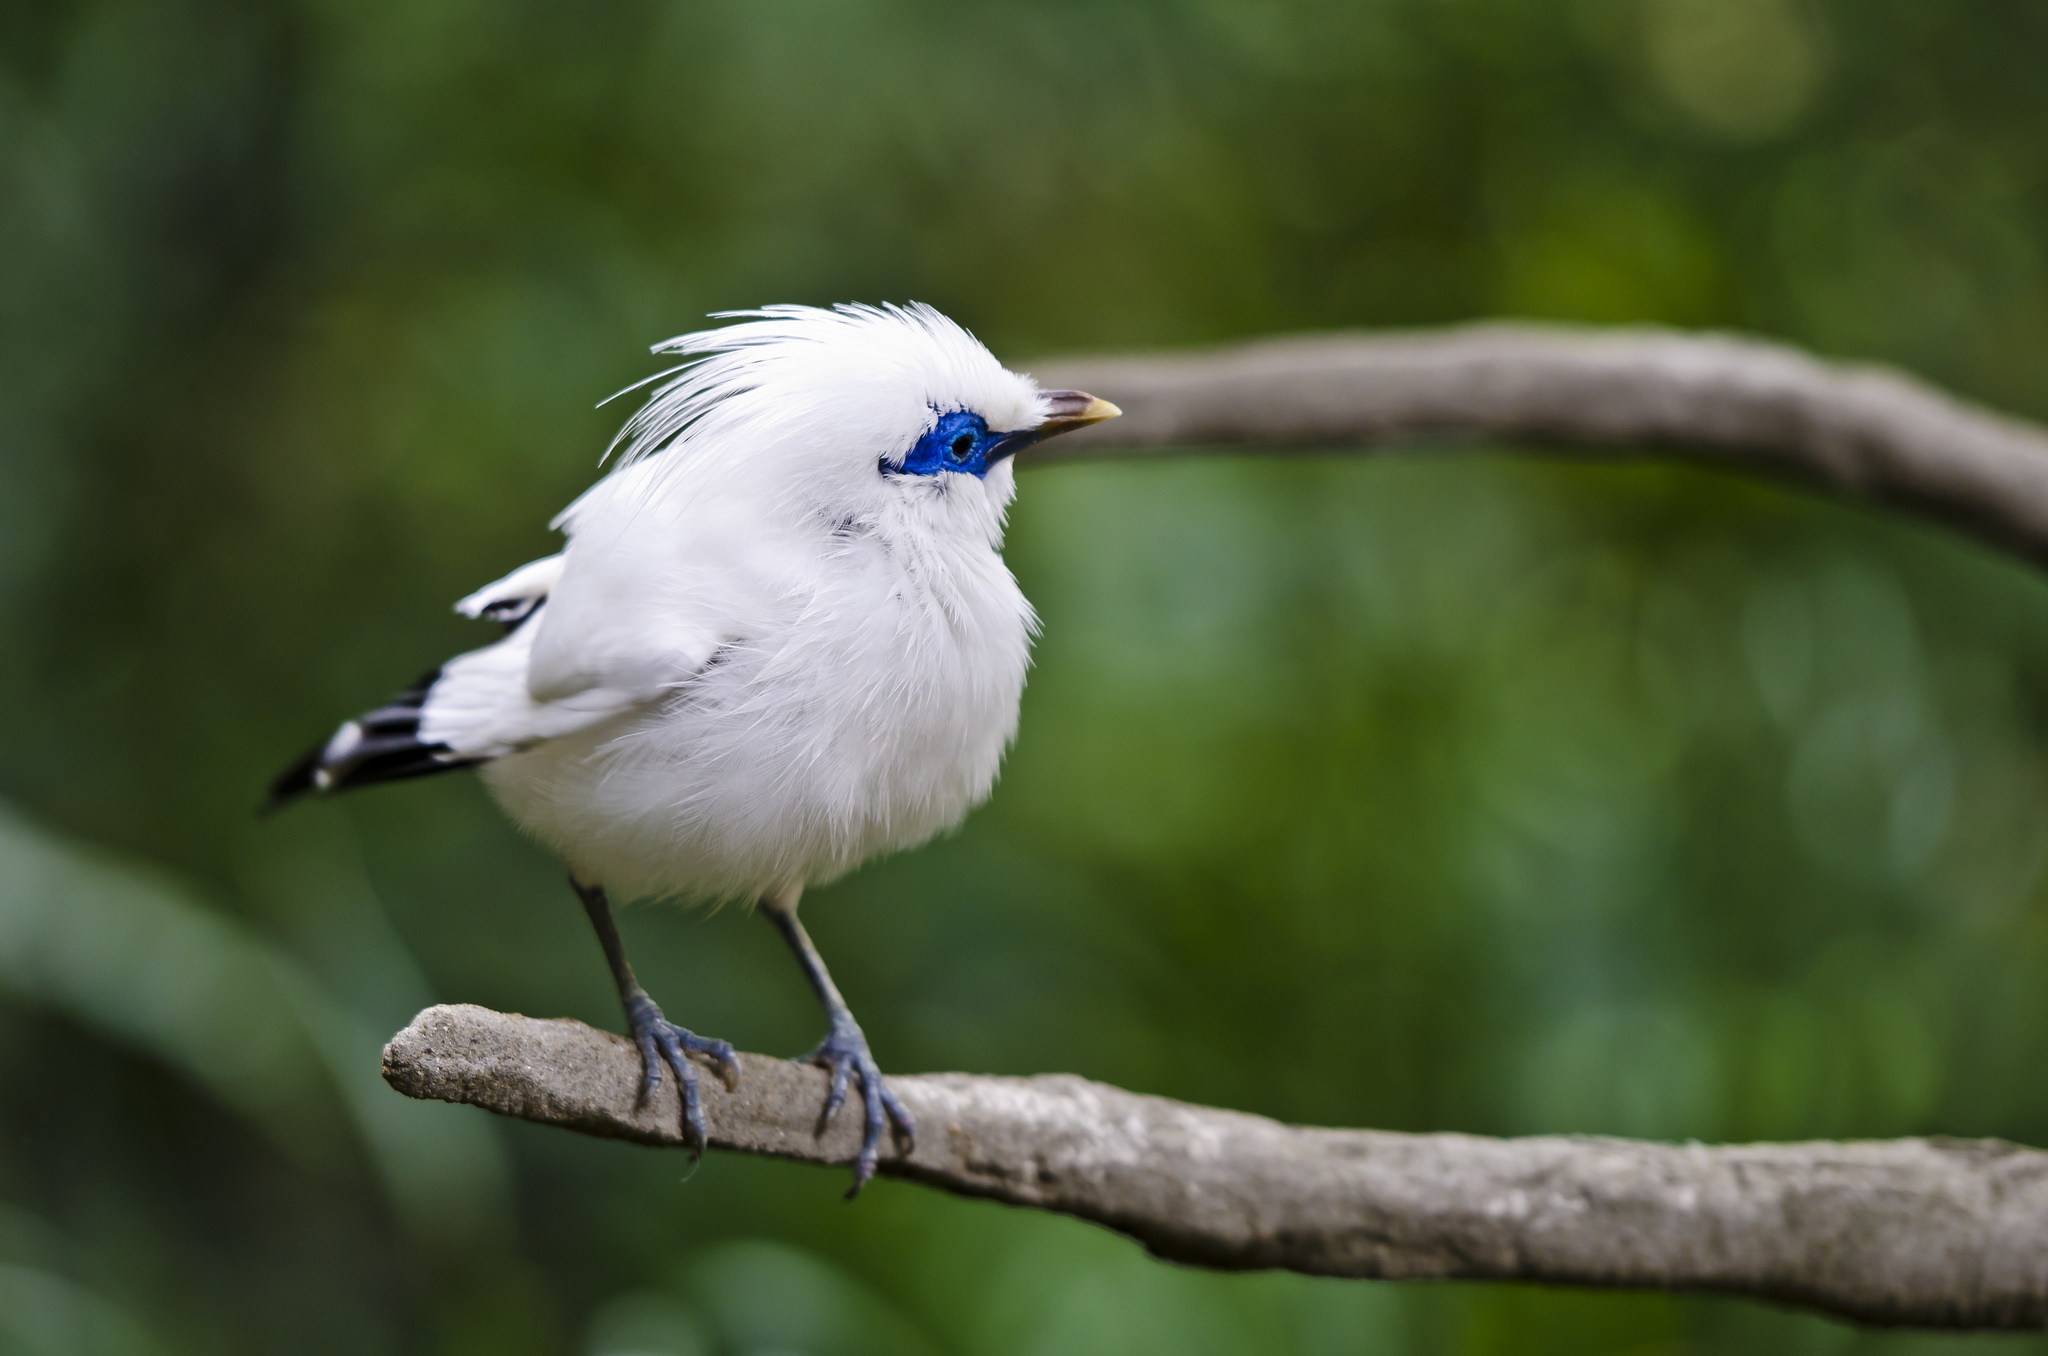 cute white birds images